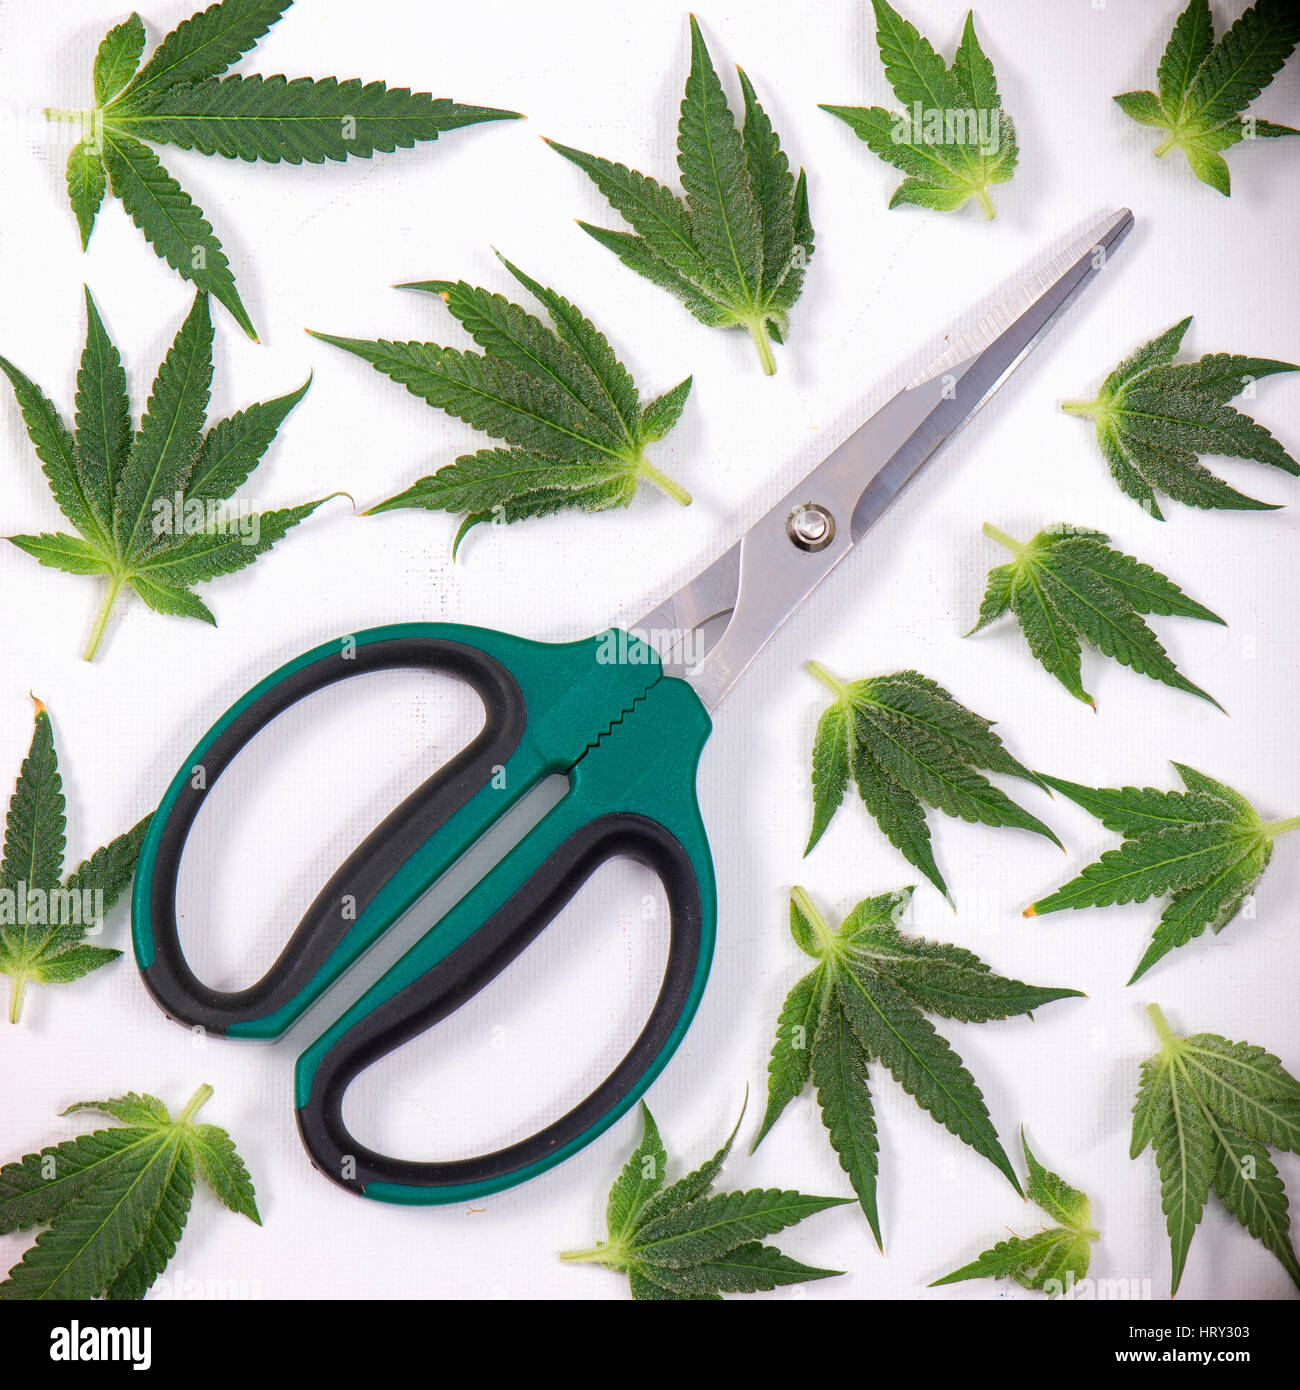 Trimming Scissor for small leaves and cannabis buds